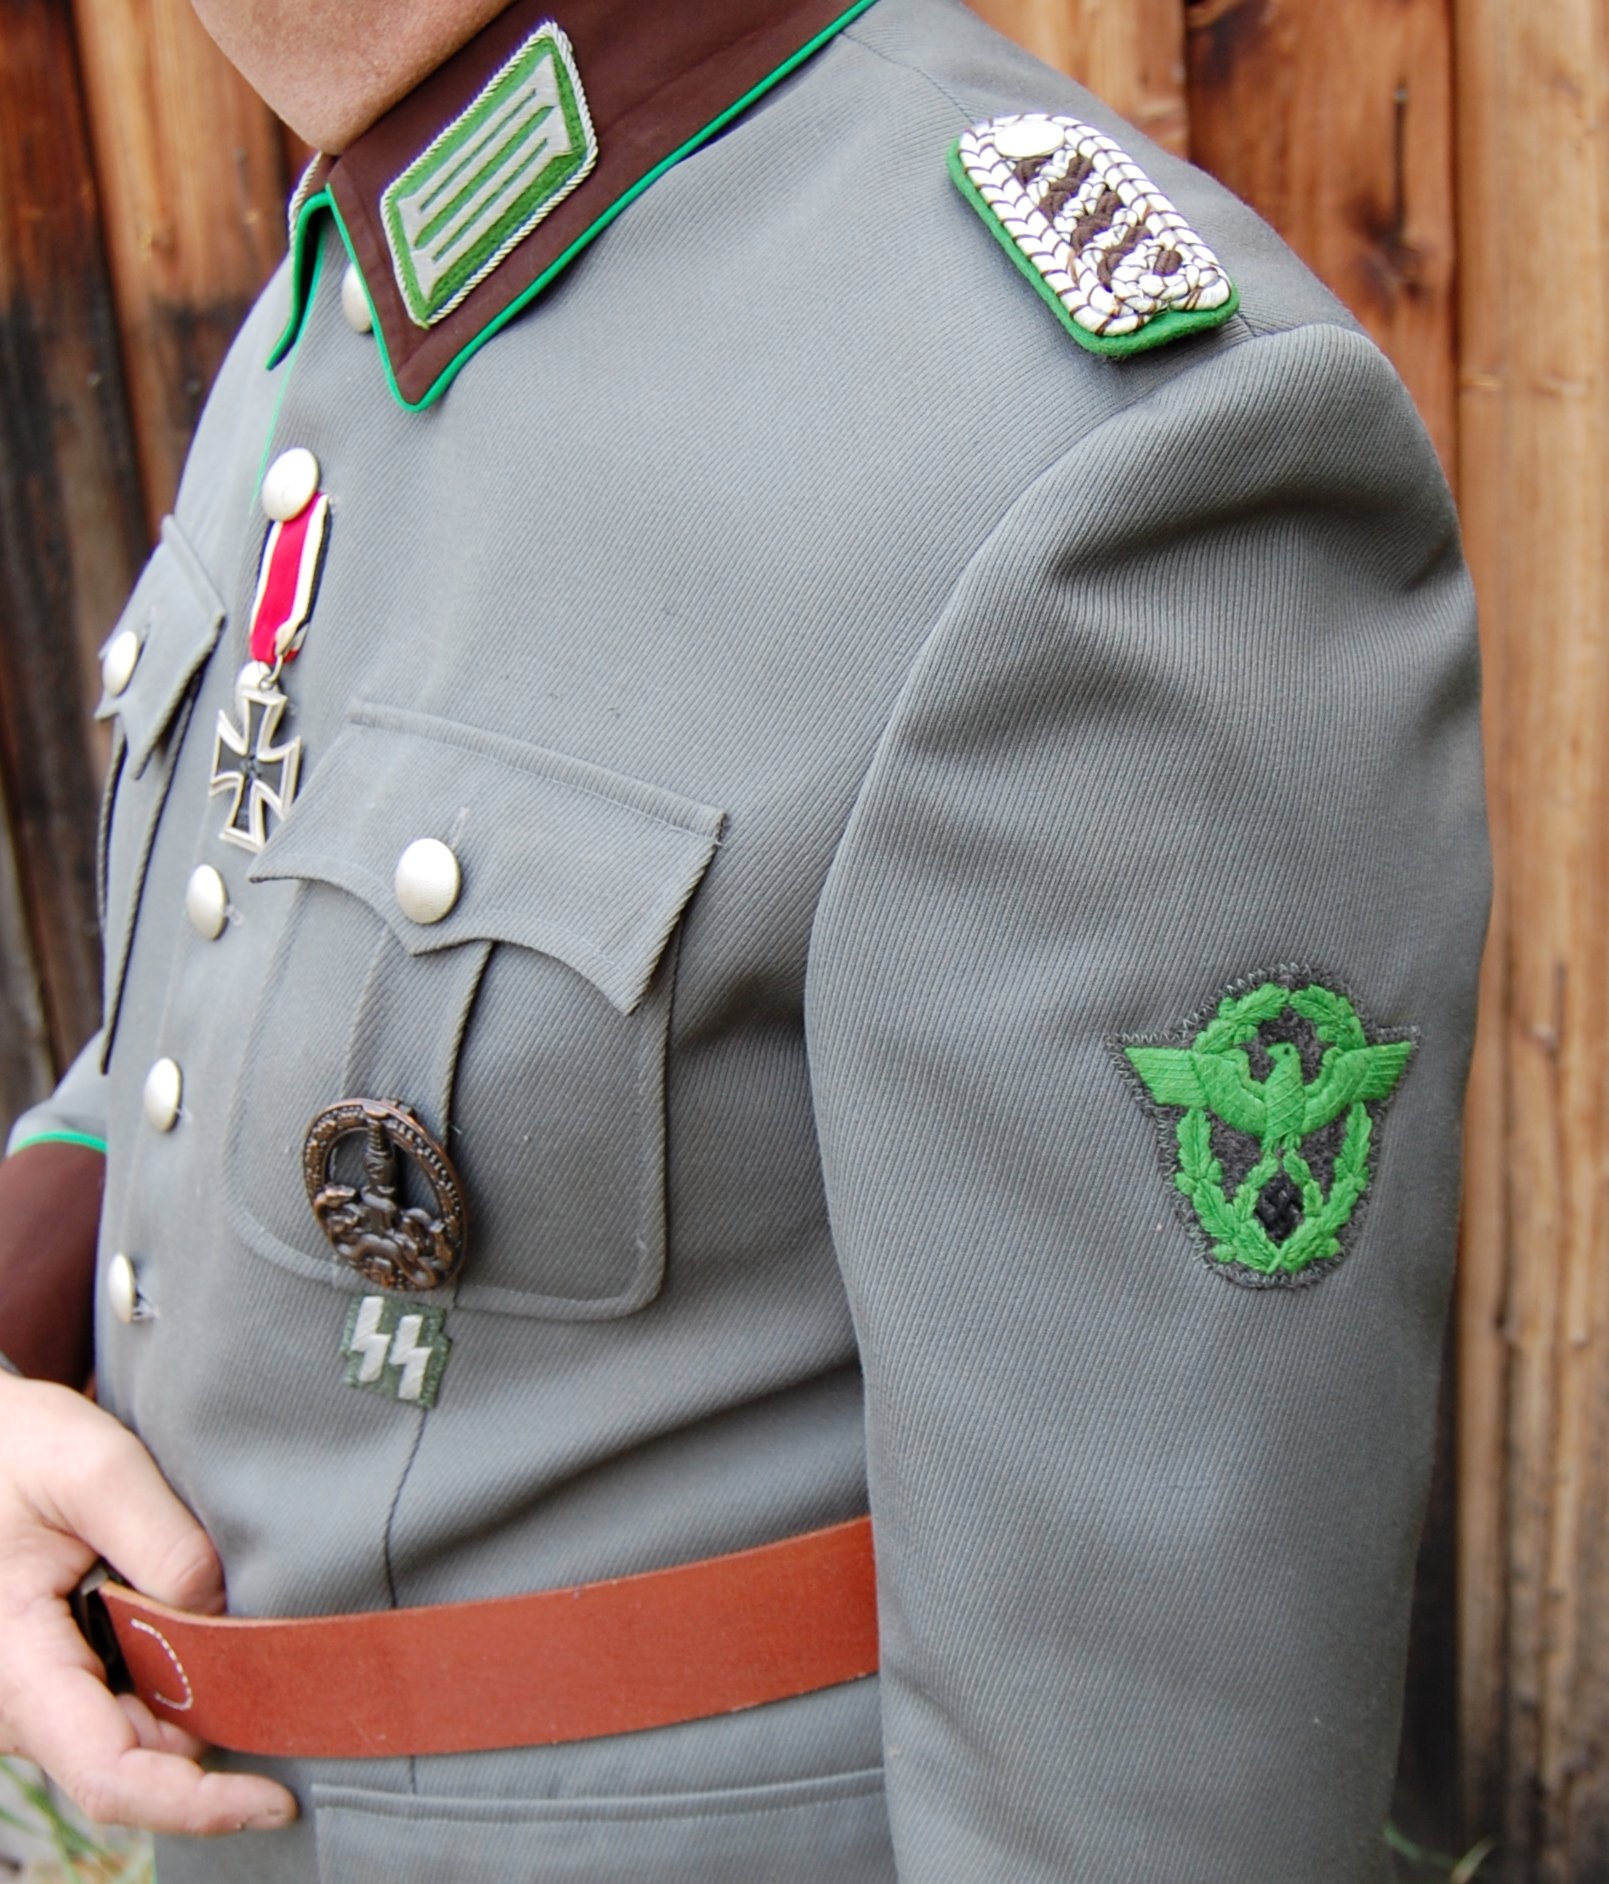 Wachtmeister Police Rgt. 10 (Green) (50).JPG